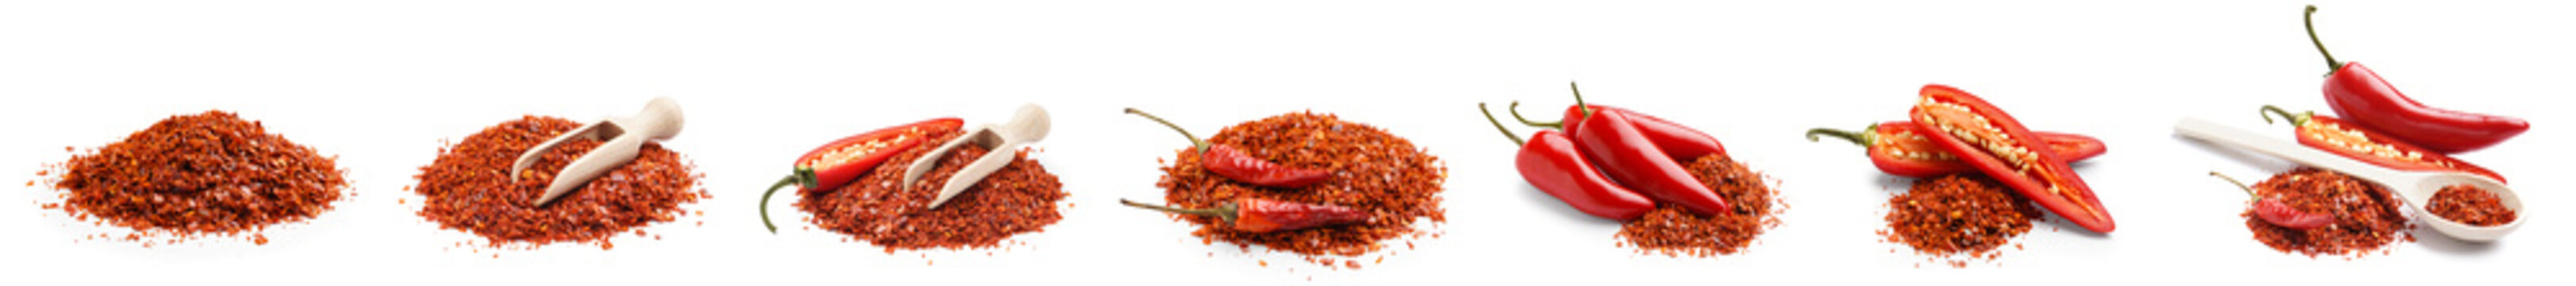 Collage of red chili flakes on white background